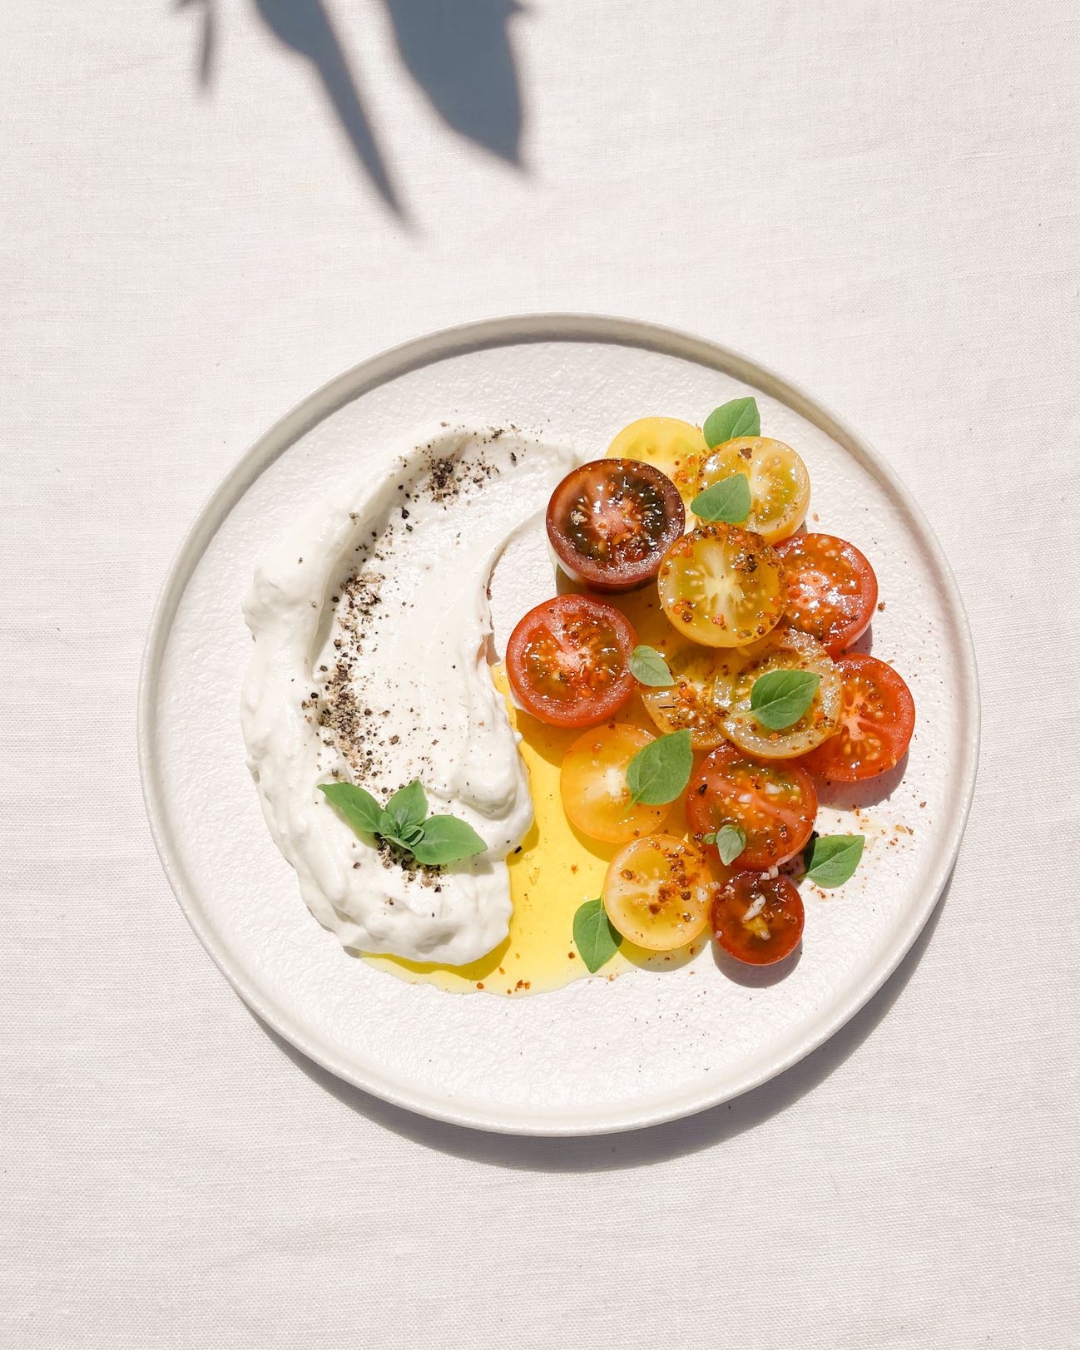 Image of Tomato Salad and Labneh recipe presented on plate